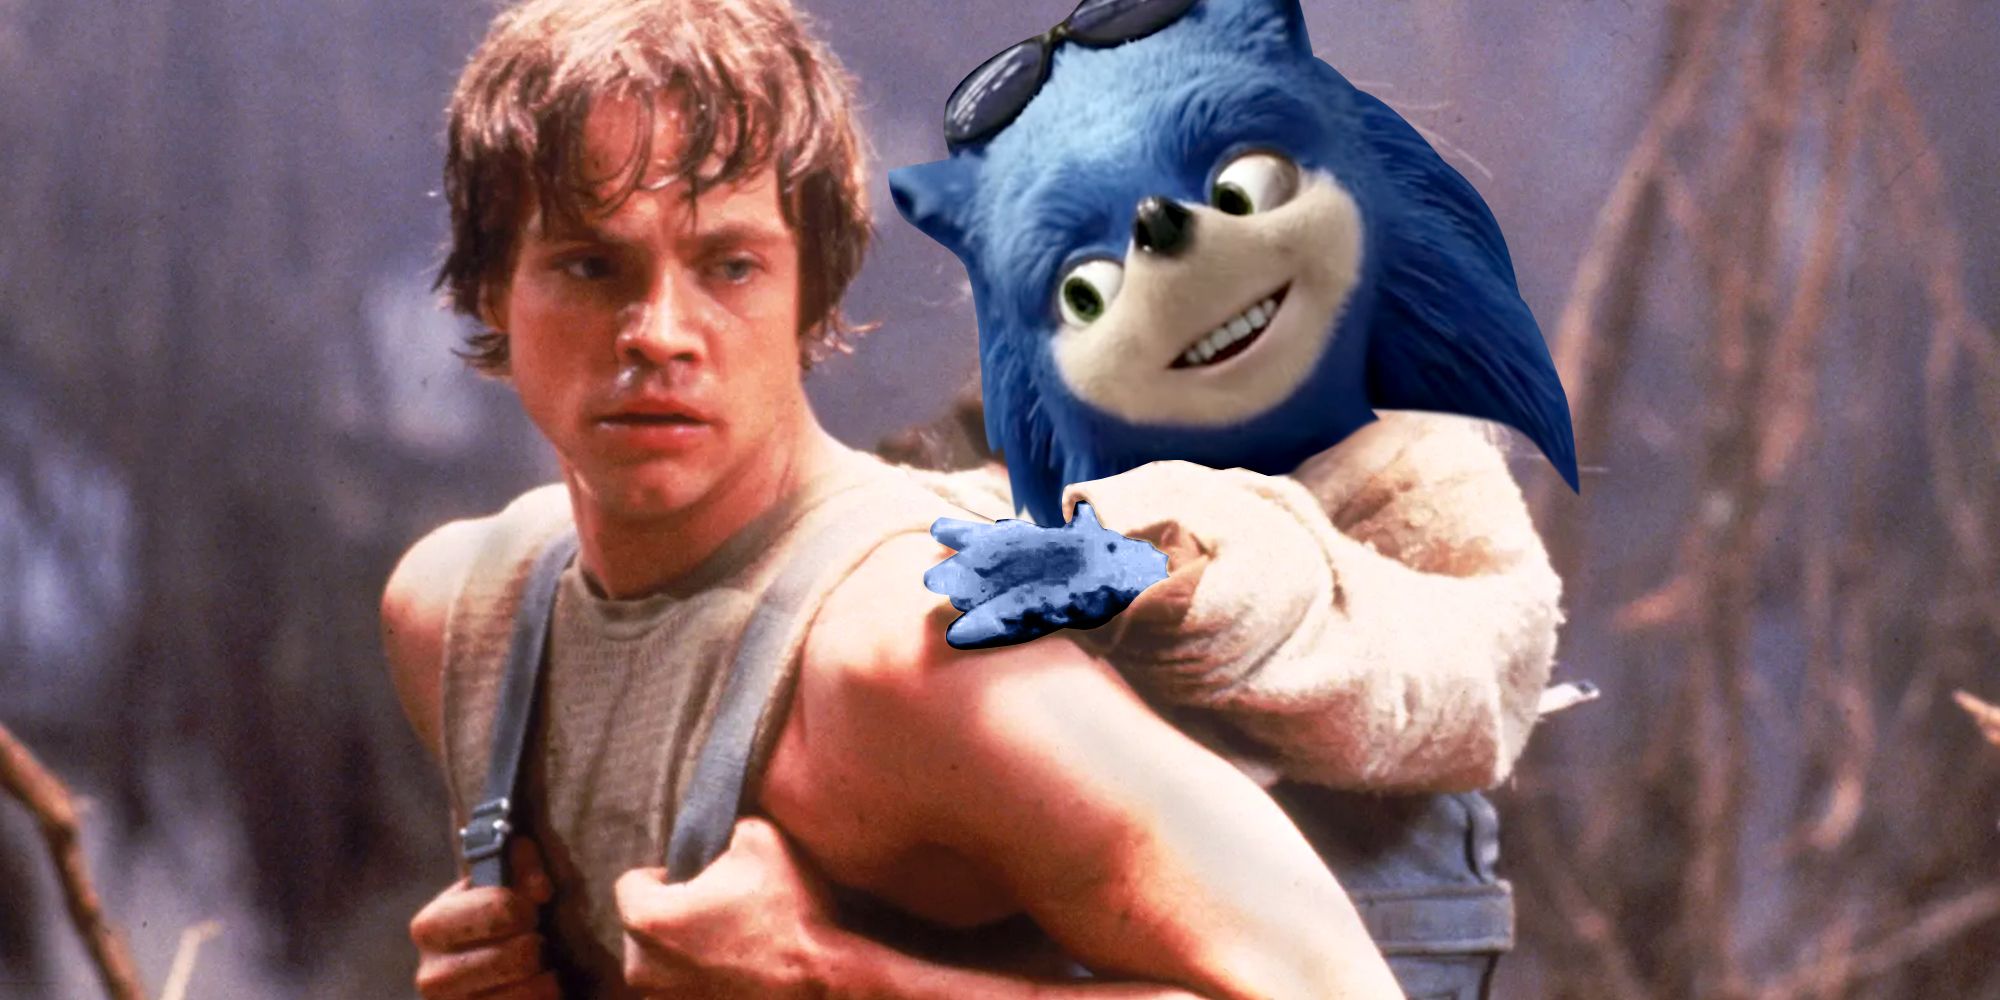 Luke Skywalker in Dagobah in The Empire Strikes Back carrying Ugly Sonic as a backpack instead of Yoda